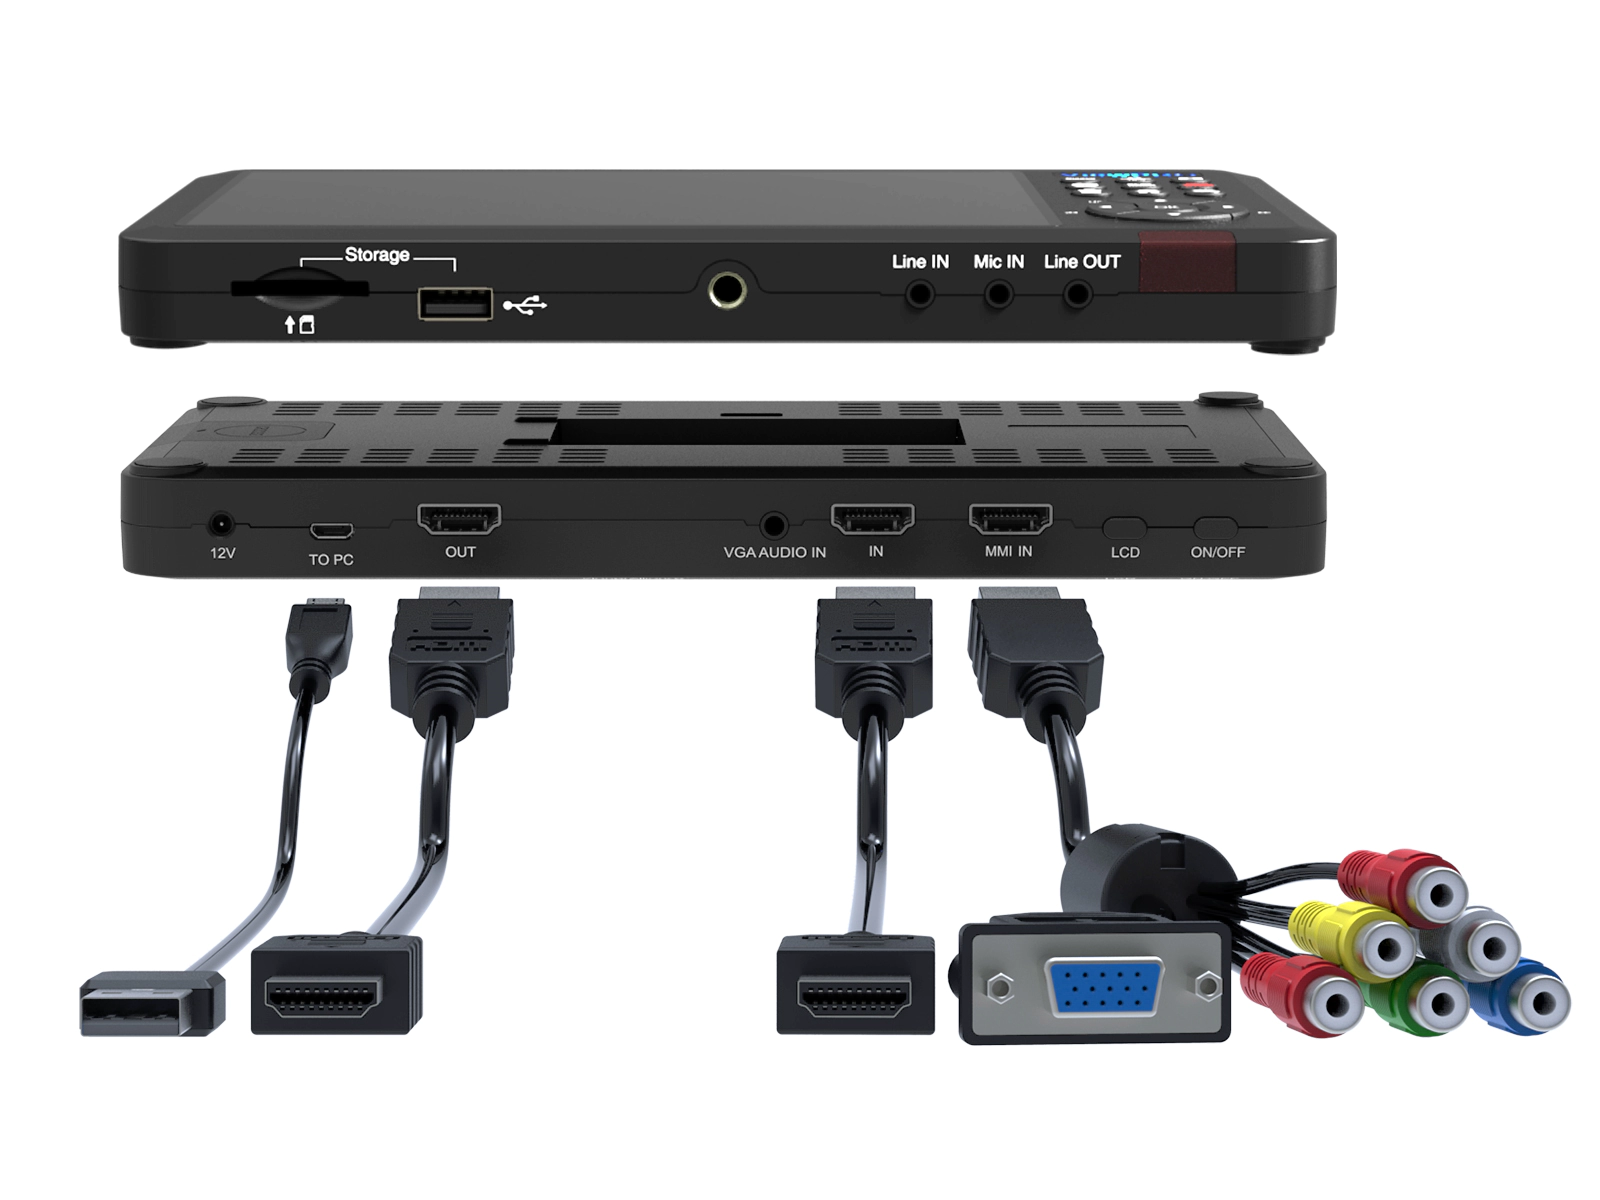  ClonerAlliance ViewPro, Portable 1080p@60fps HDMI Video  Recorder and Playback with 7 LCD, AV/VGA/YPbPr Inputs. Schedule Recording.  No TV is Required. : Electronics